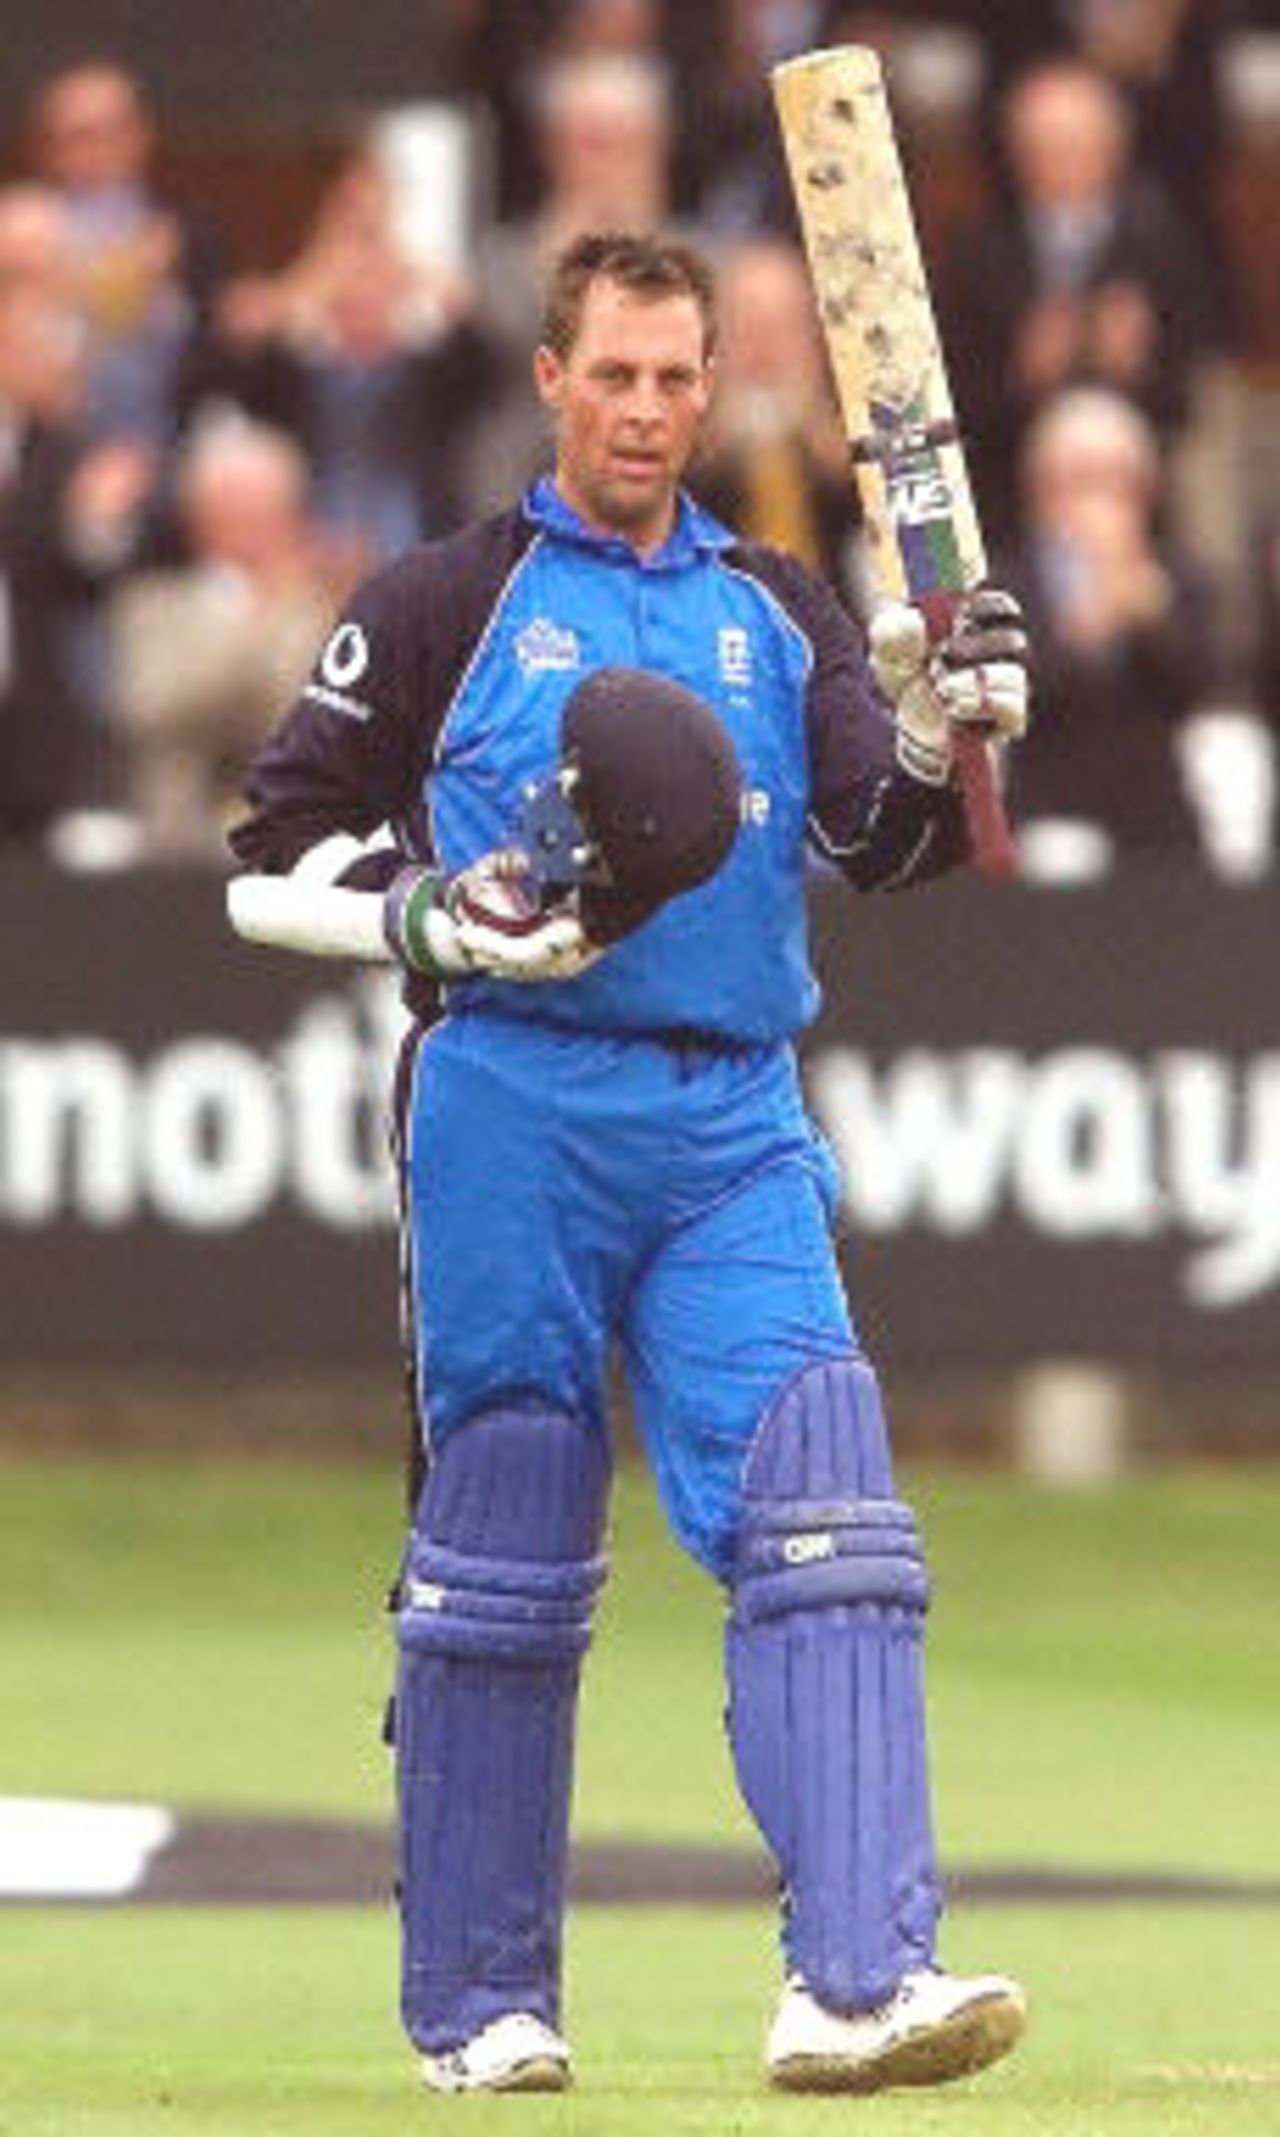 Trescothick acknowledges the crowd after scoring a century, 4th ODI at Lords, 12 June 2001.